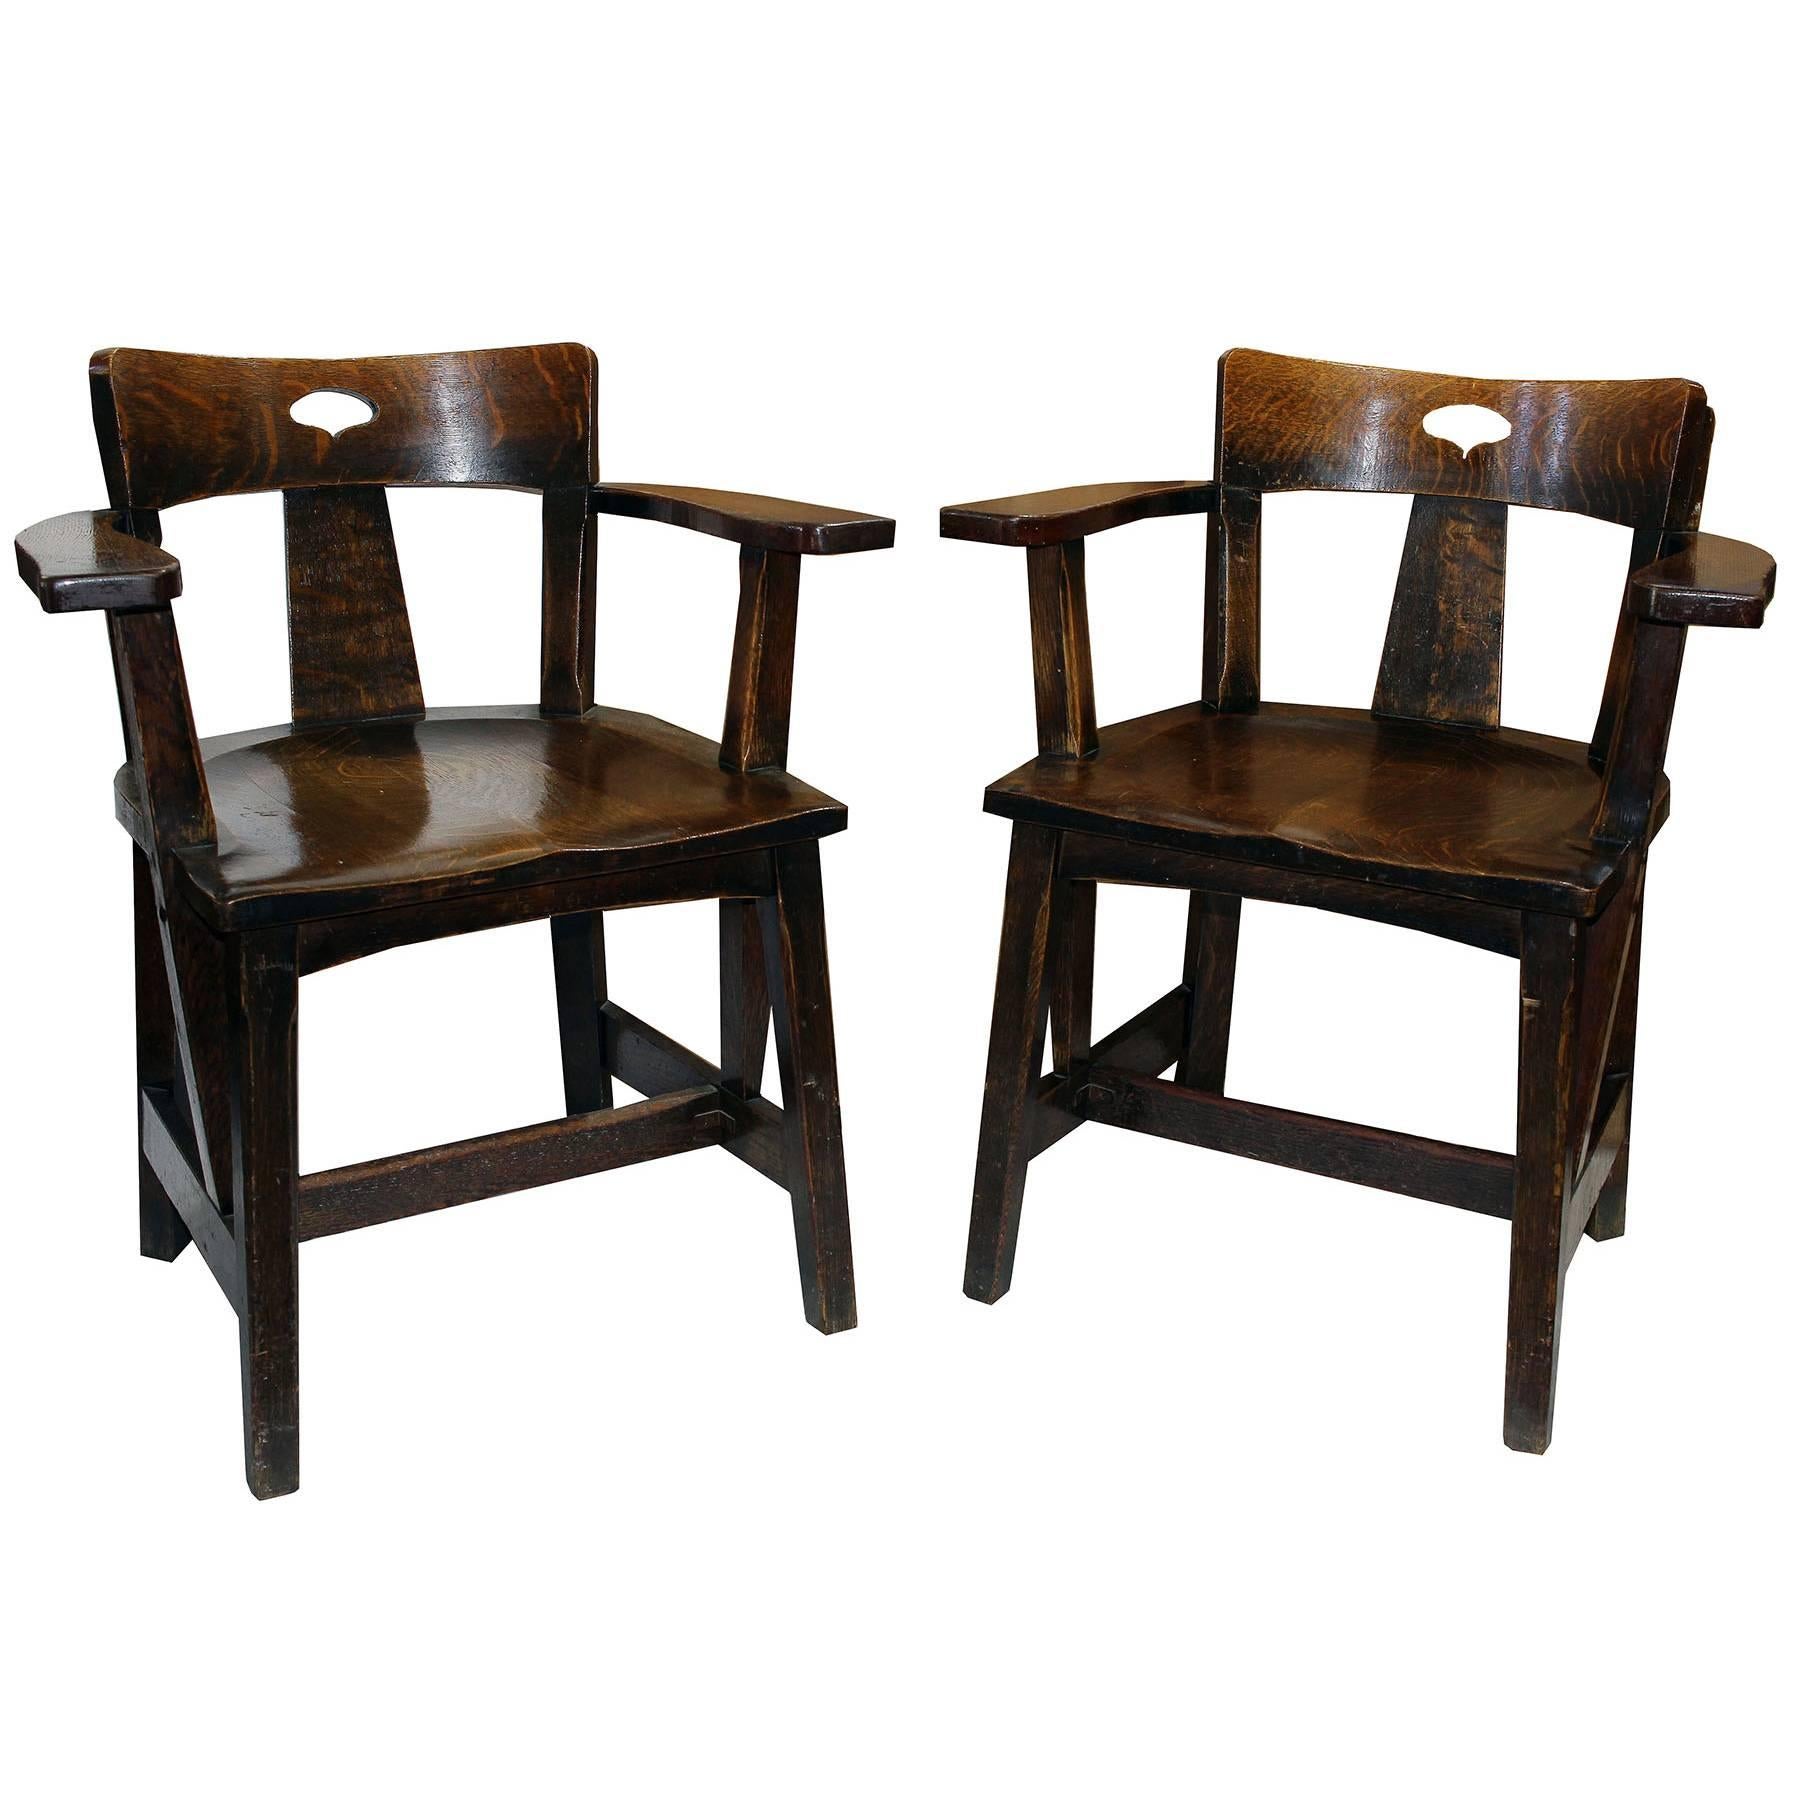 Pair of Unique Charles Limbert Armchairs